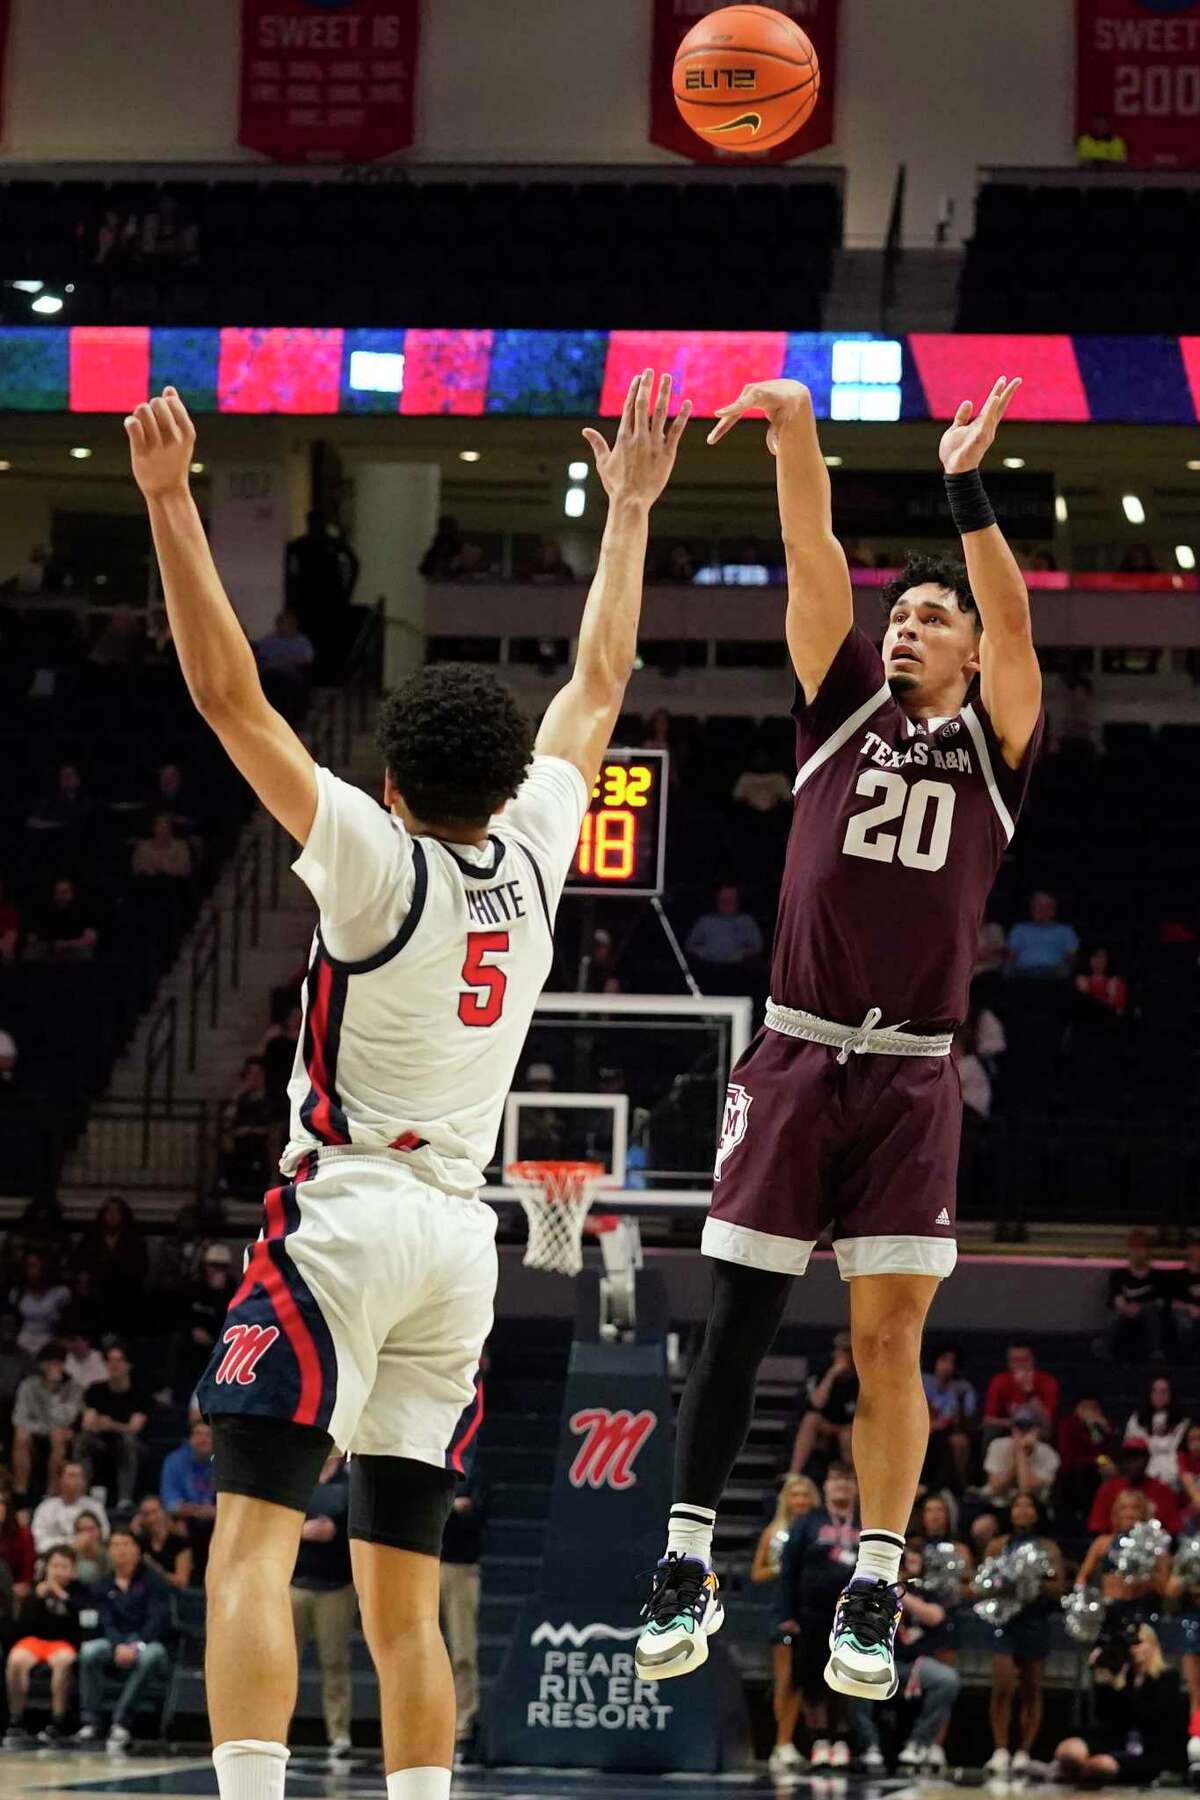 Texas A&M guard Andre Gordon (20) attempts a shot over the defense of Mississippi guard James White (5) during the first half of an NCAA college basketball game in Oxford, Miss., Tuesday, Feb. 28, 2023. (AP Photo/Rogelio V. Solis)